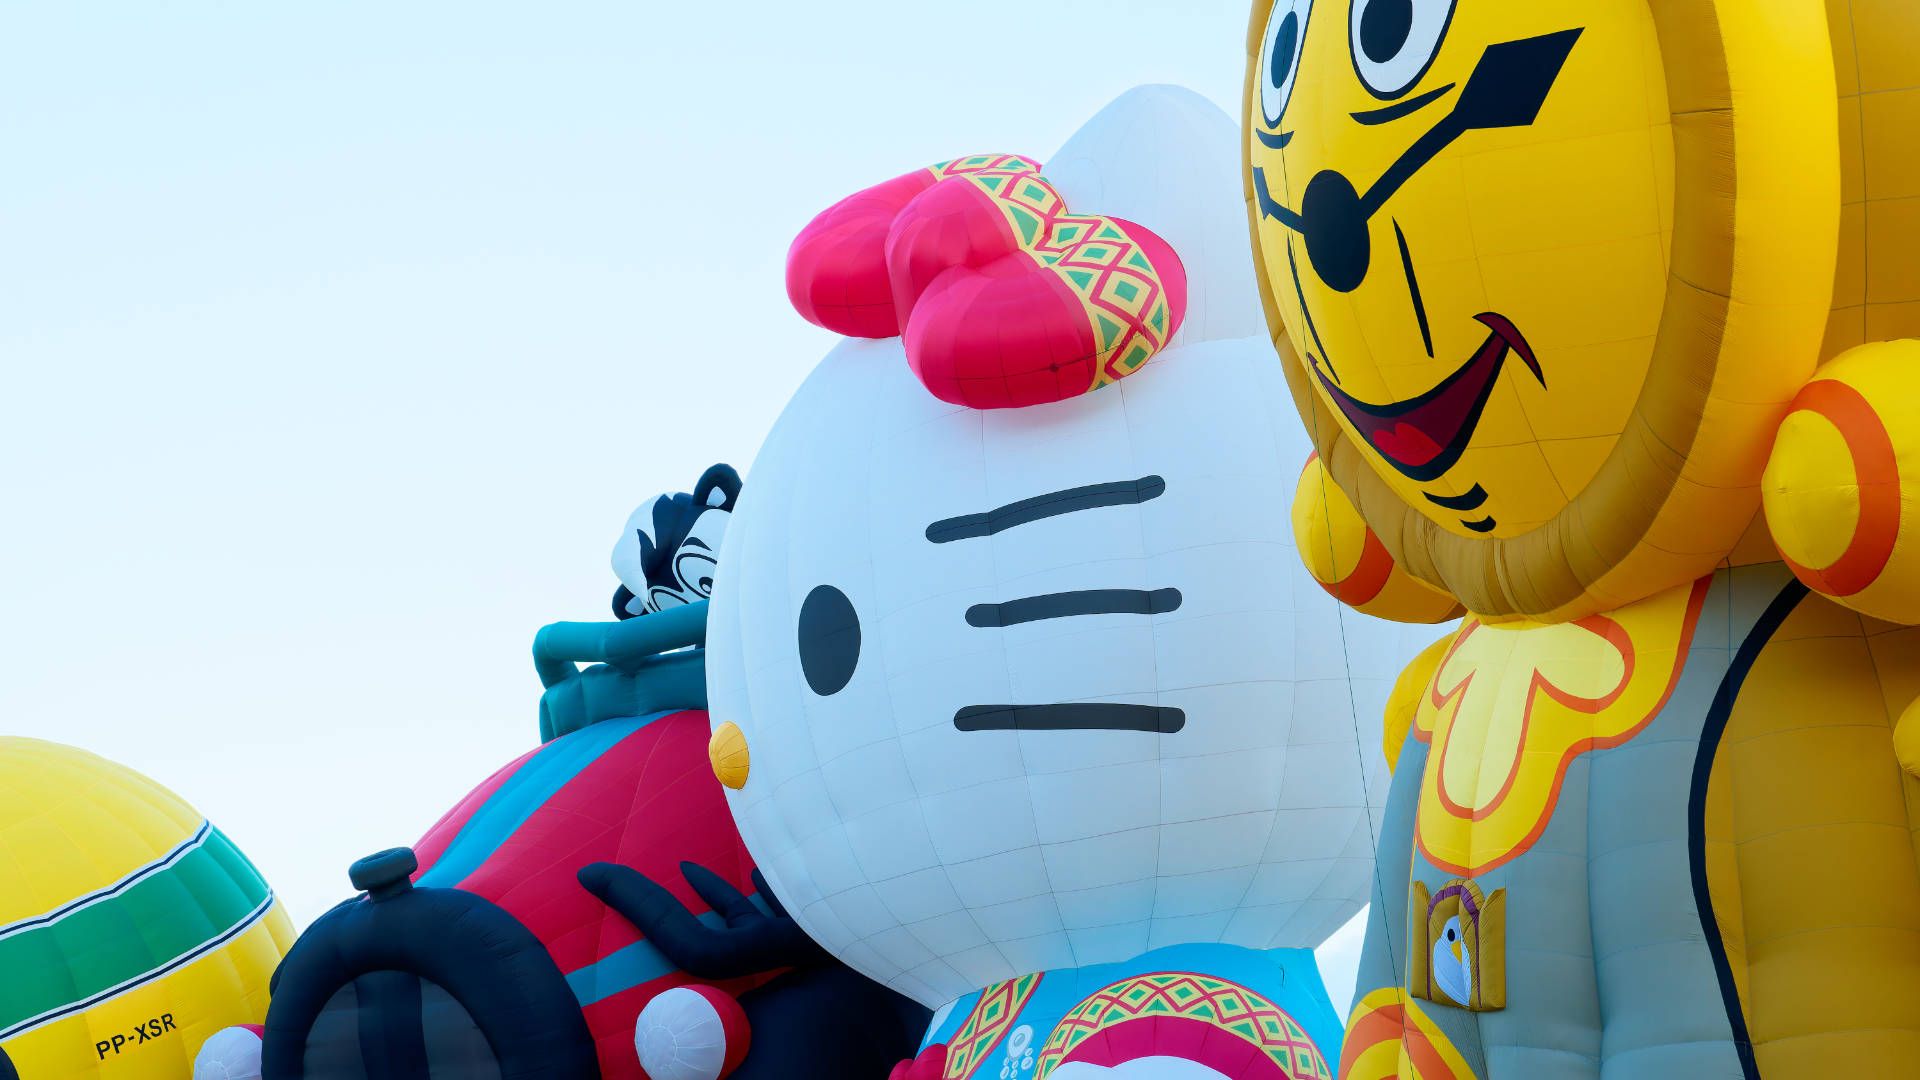 Four fully-inflated hot air balloons in a line: A racing helmet, a cartoon skunk in a car, Hello Kitty, and a lion-shaped cuckoo clock.